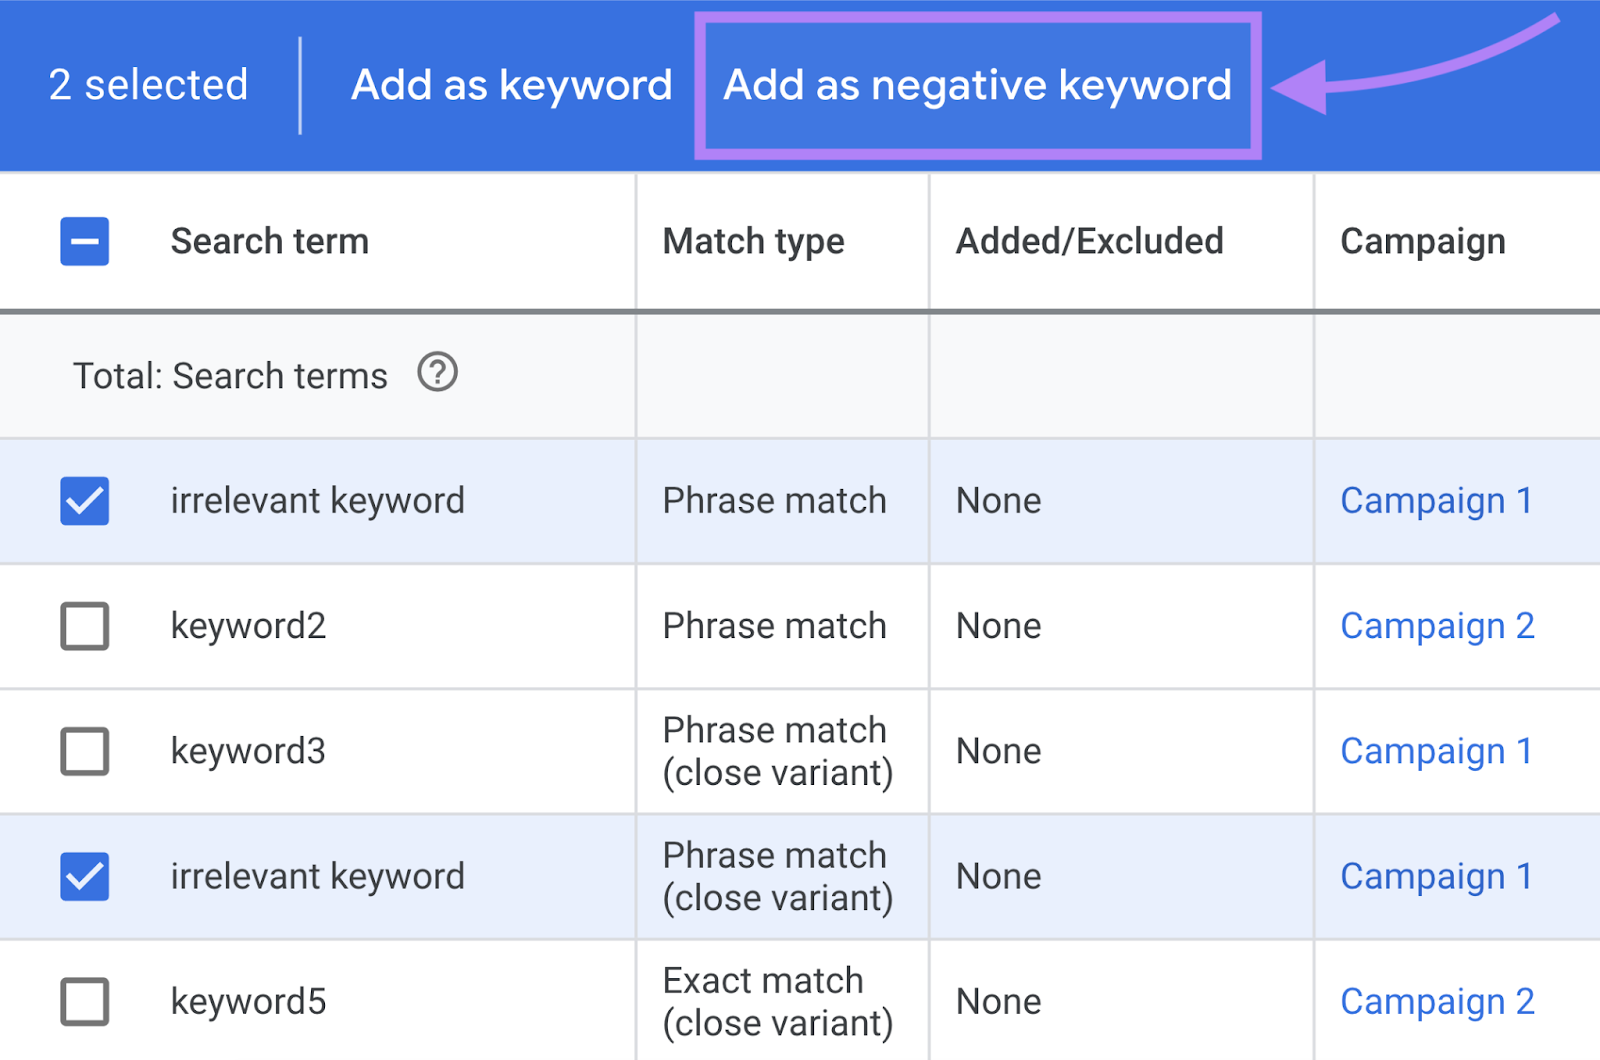 navigation to “Add as negative keyword” in Google Ads